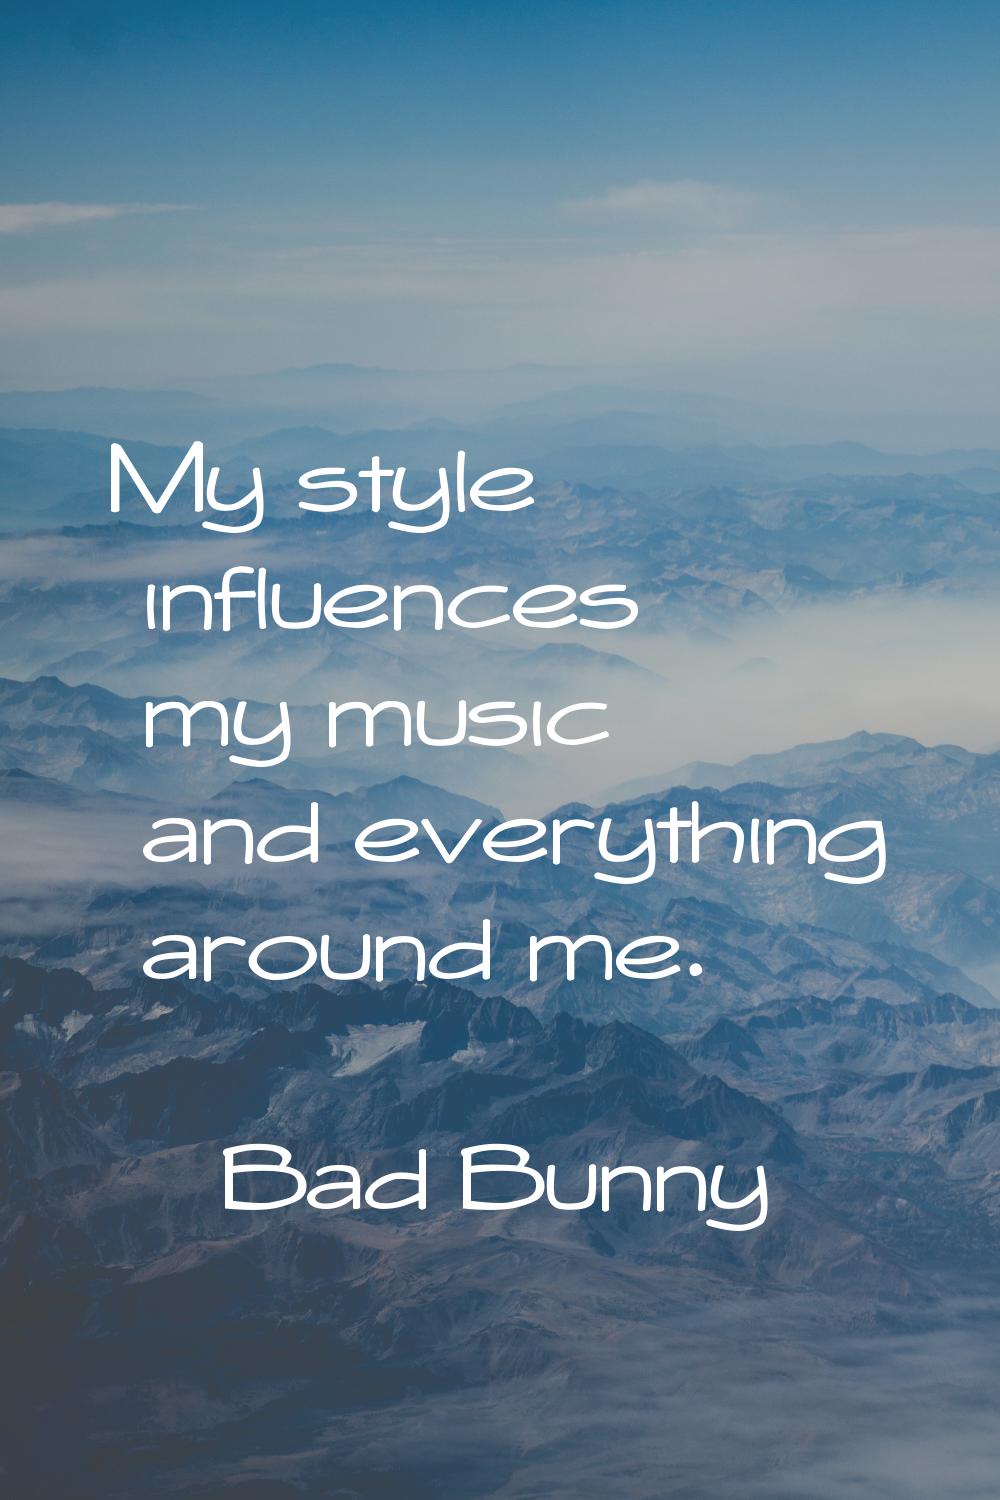 My style influences my music and everything around me.